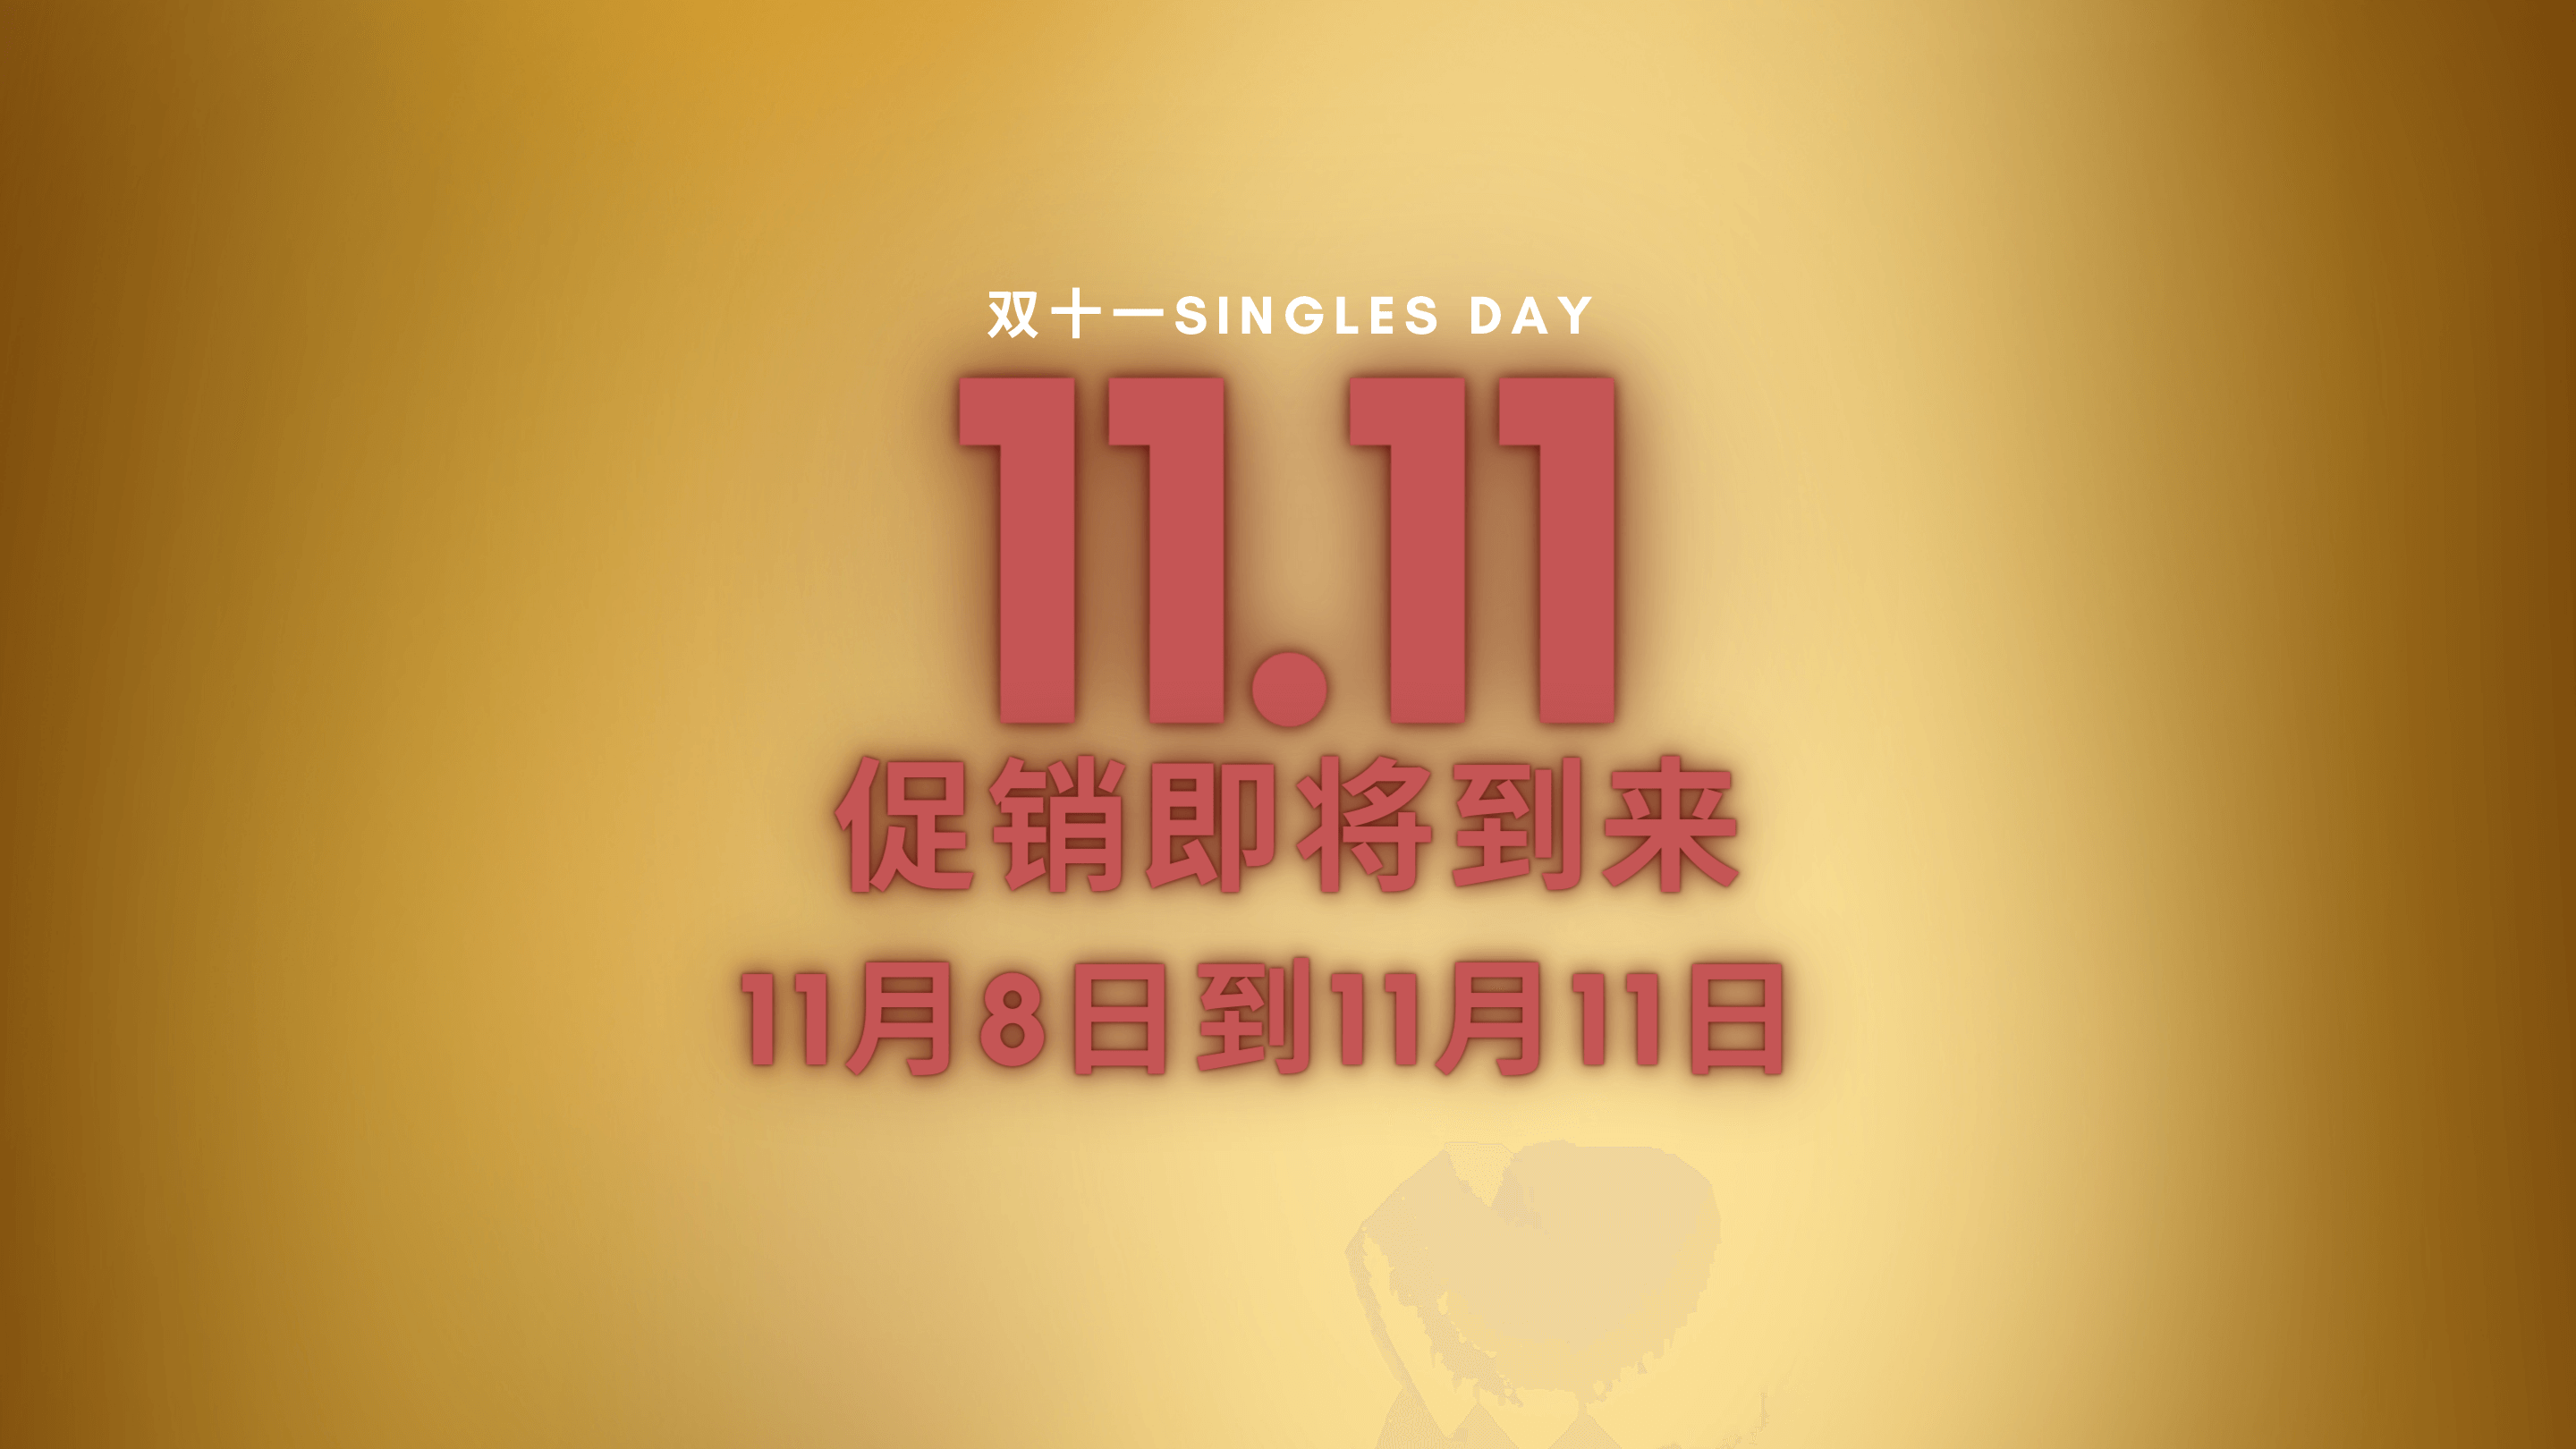 Singles day exclusive gift with purchase offers